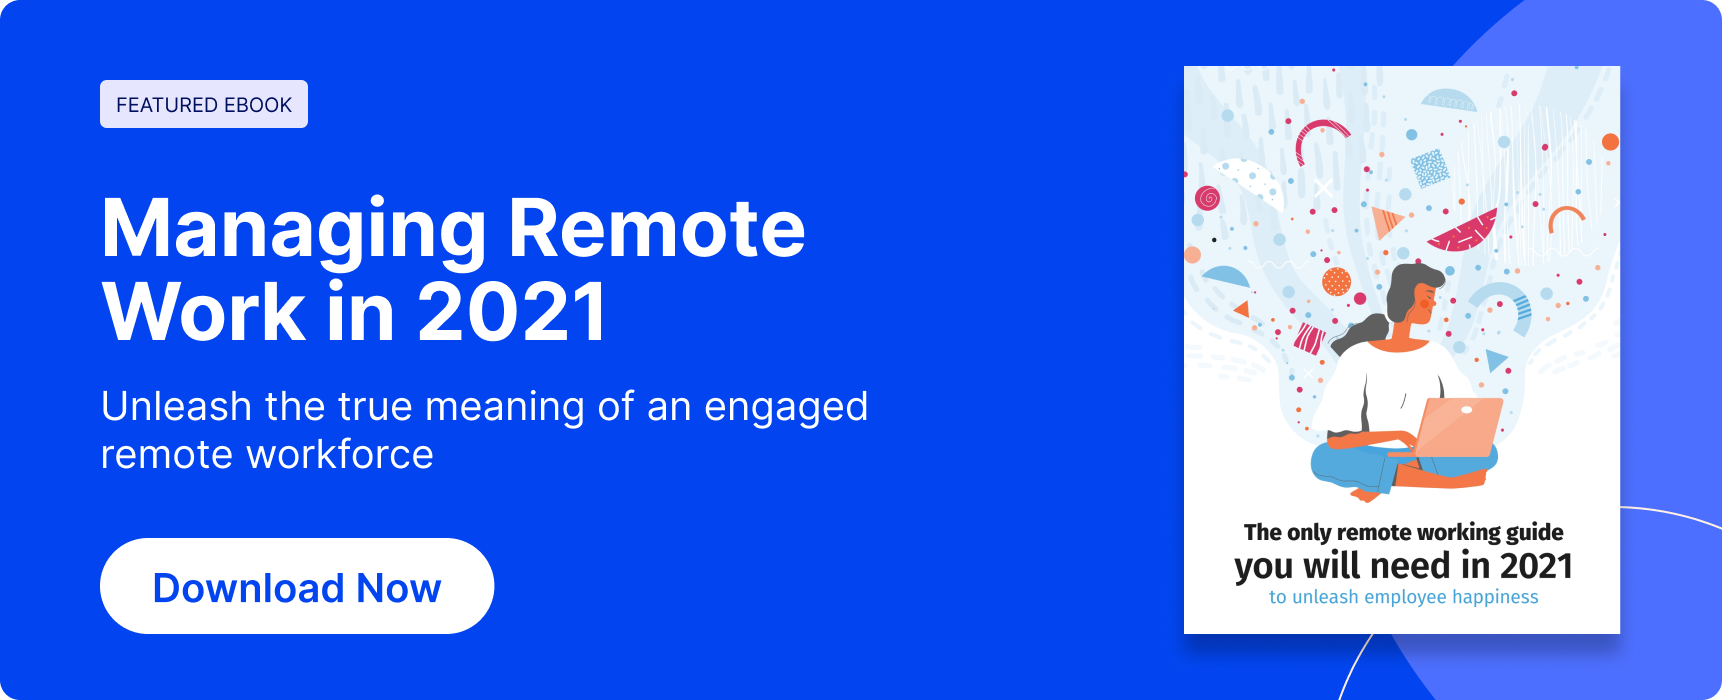 Remote Working Guide for 2021